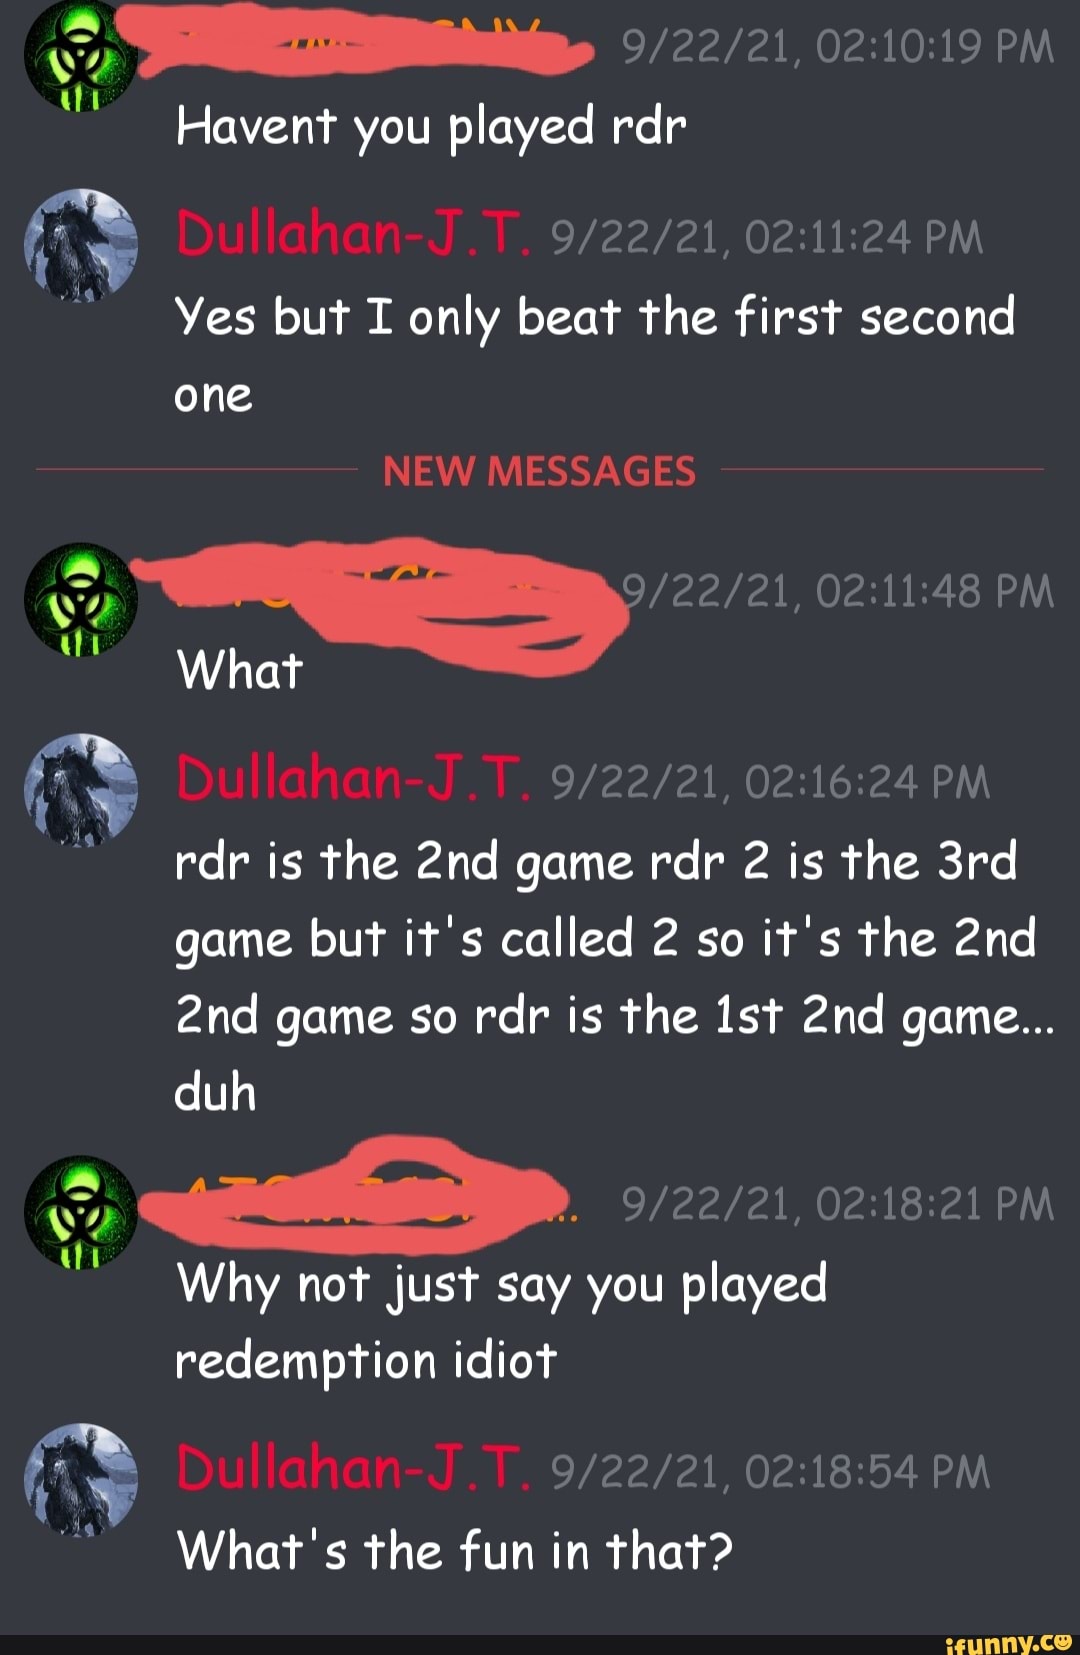 Pm Havent You Played Rdr Pm Yes But I Only Beat The First Second One New